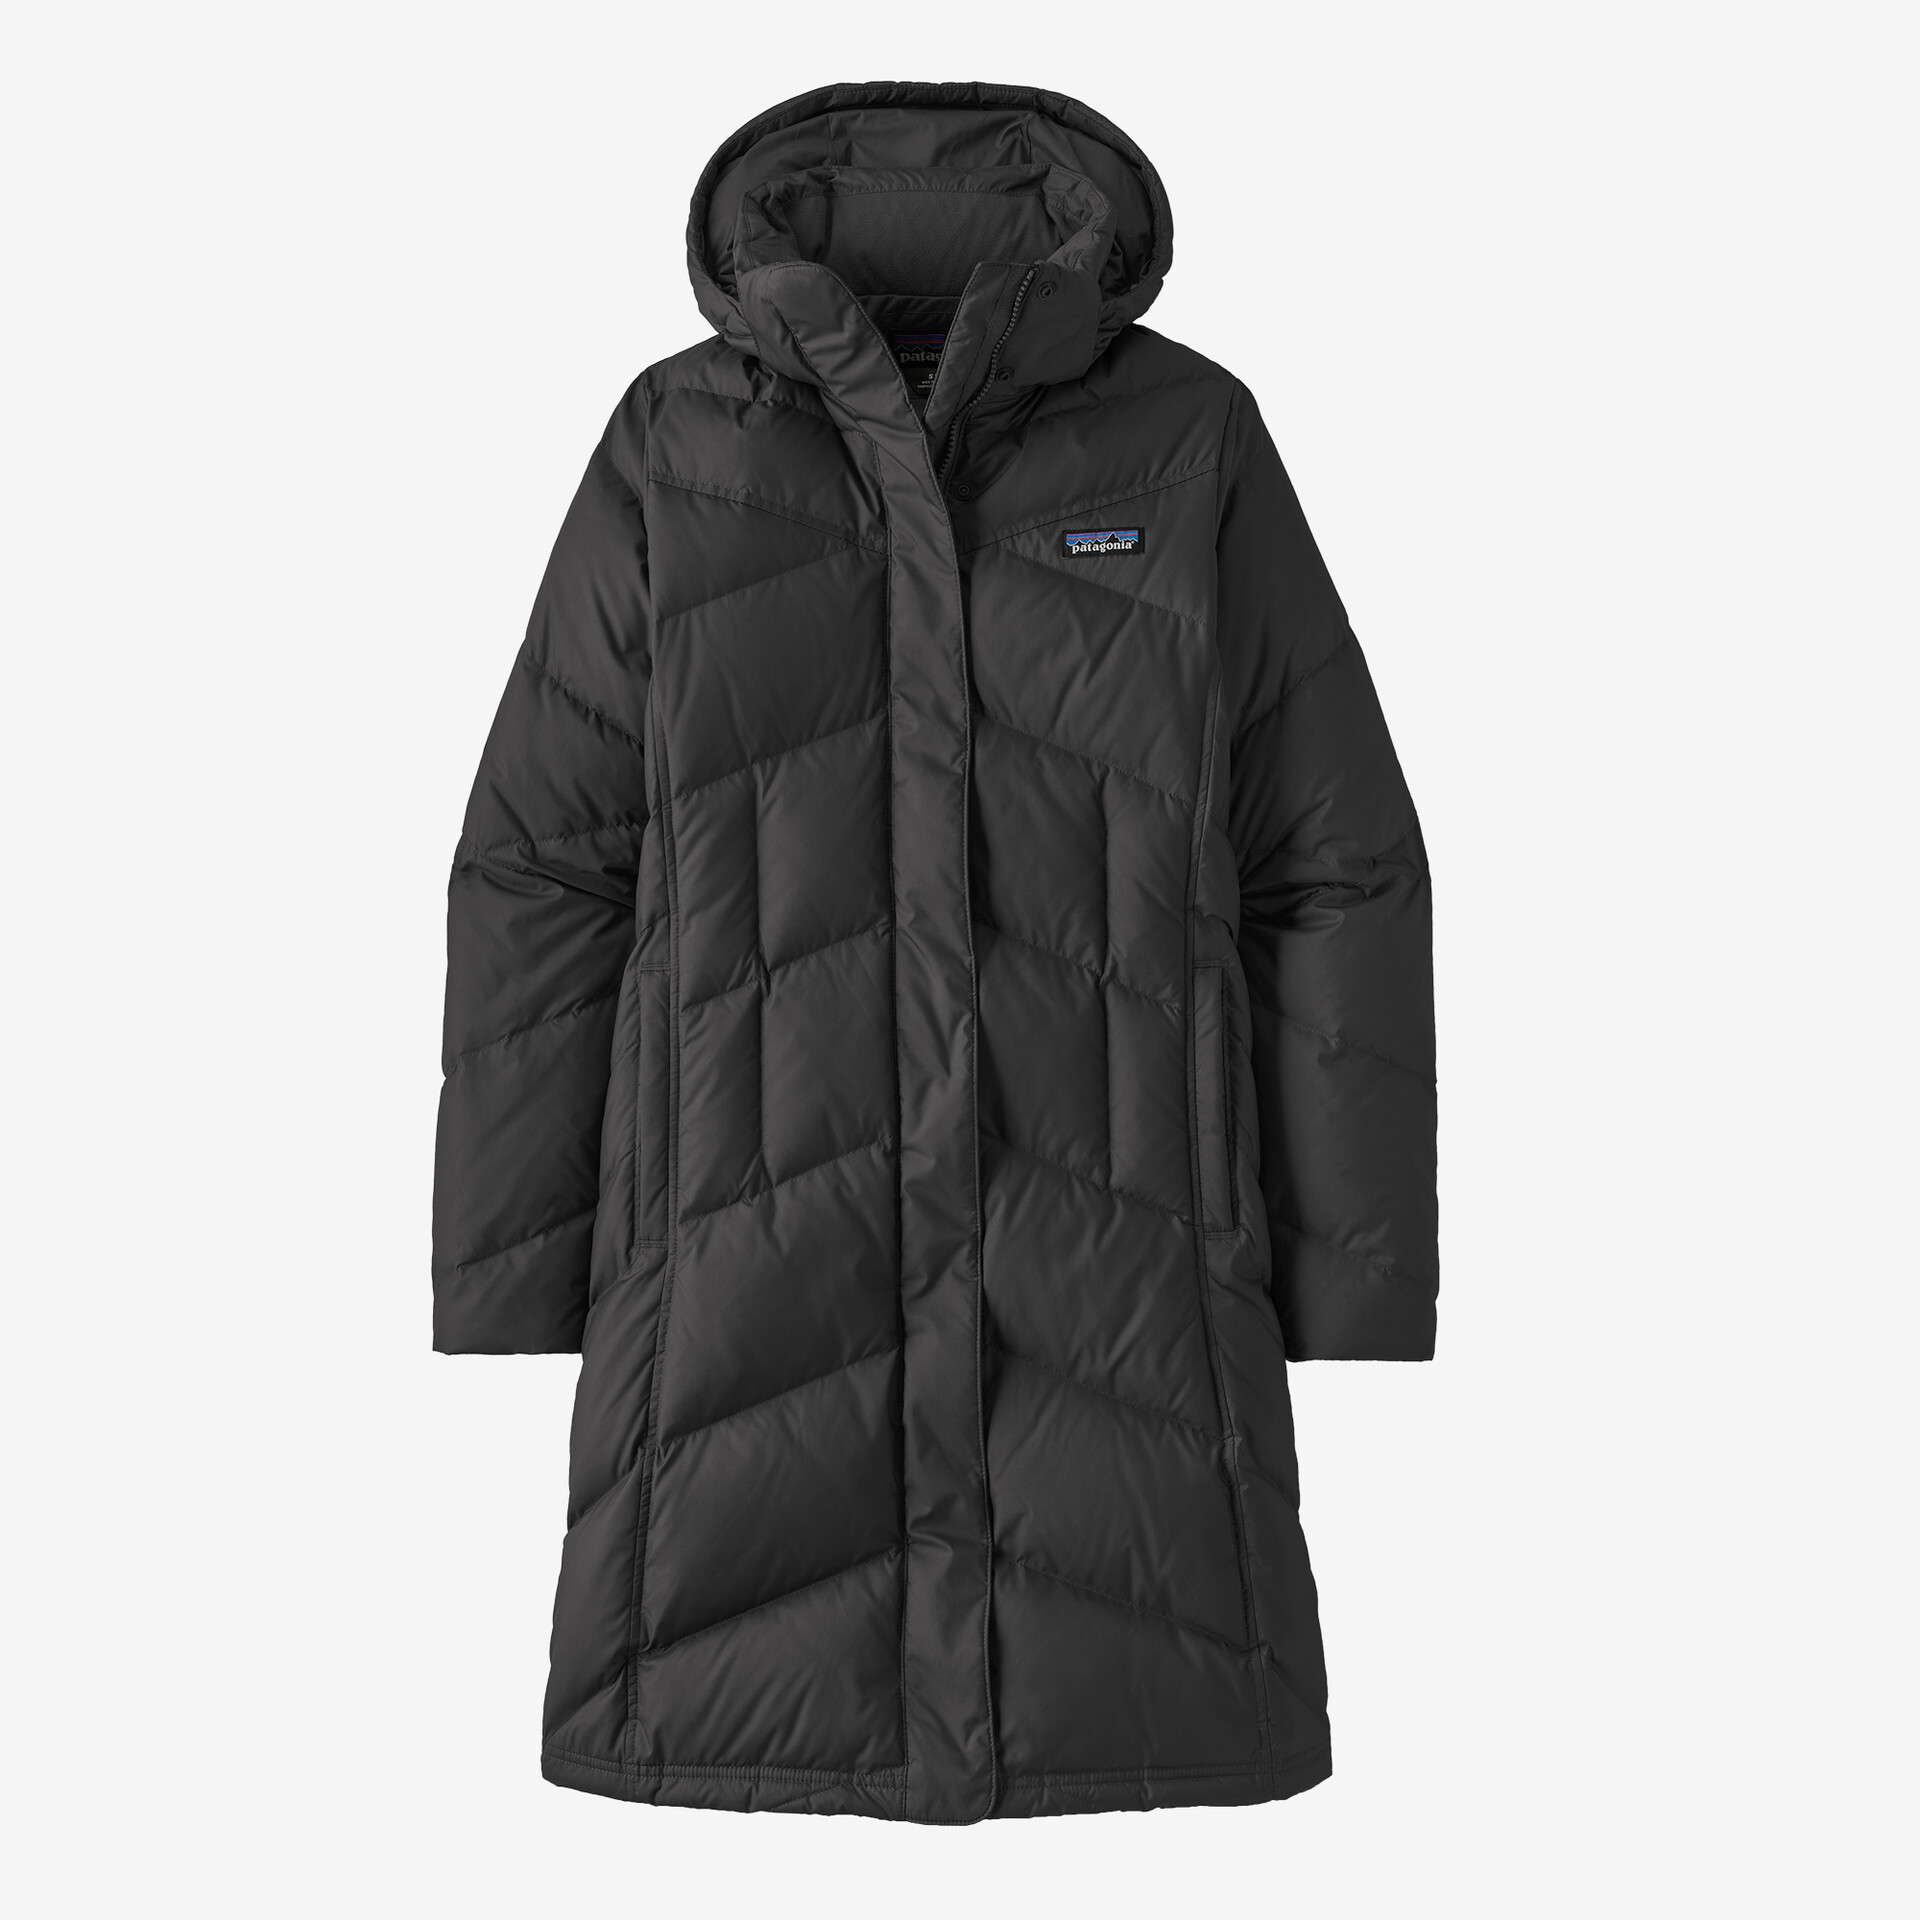 8 Best Long Puffer Coats for Bone-Chilling Days: Stylish and Warm